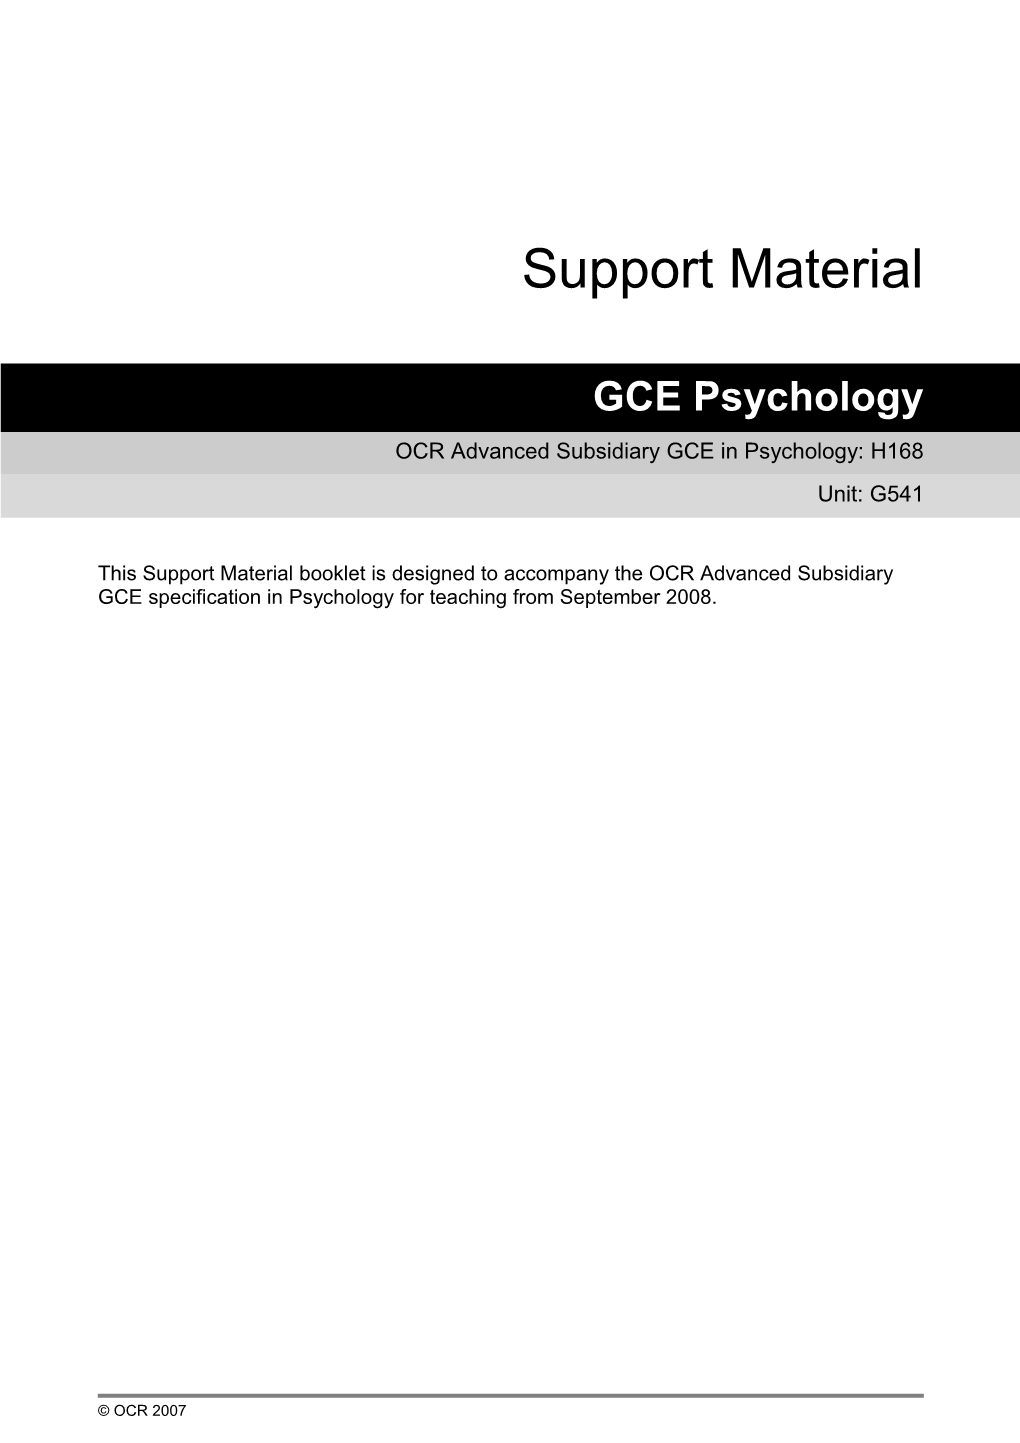 OCR Advanced Subsidiary GCE in Psychology: H168